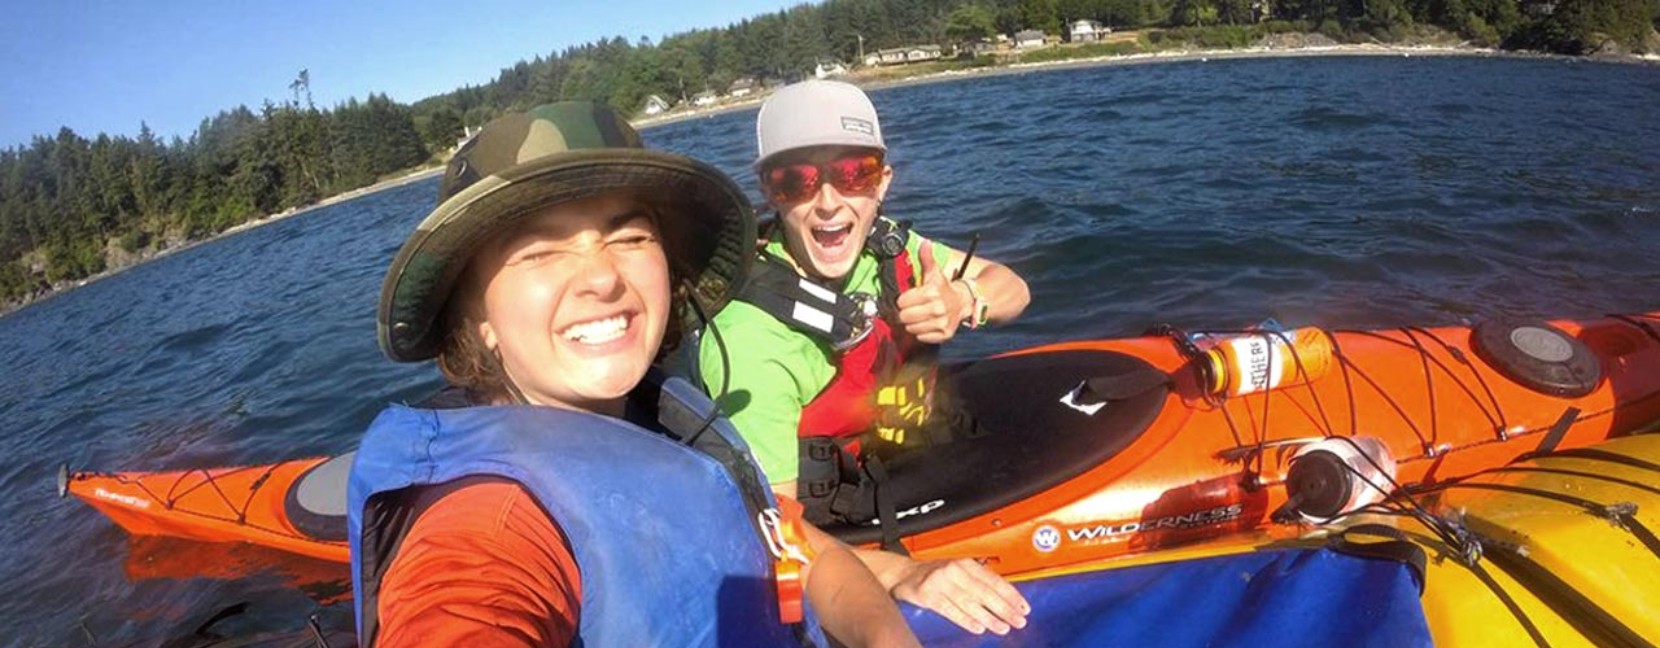 Two women in kayaks pose for a selfie with big grins.